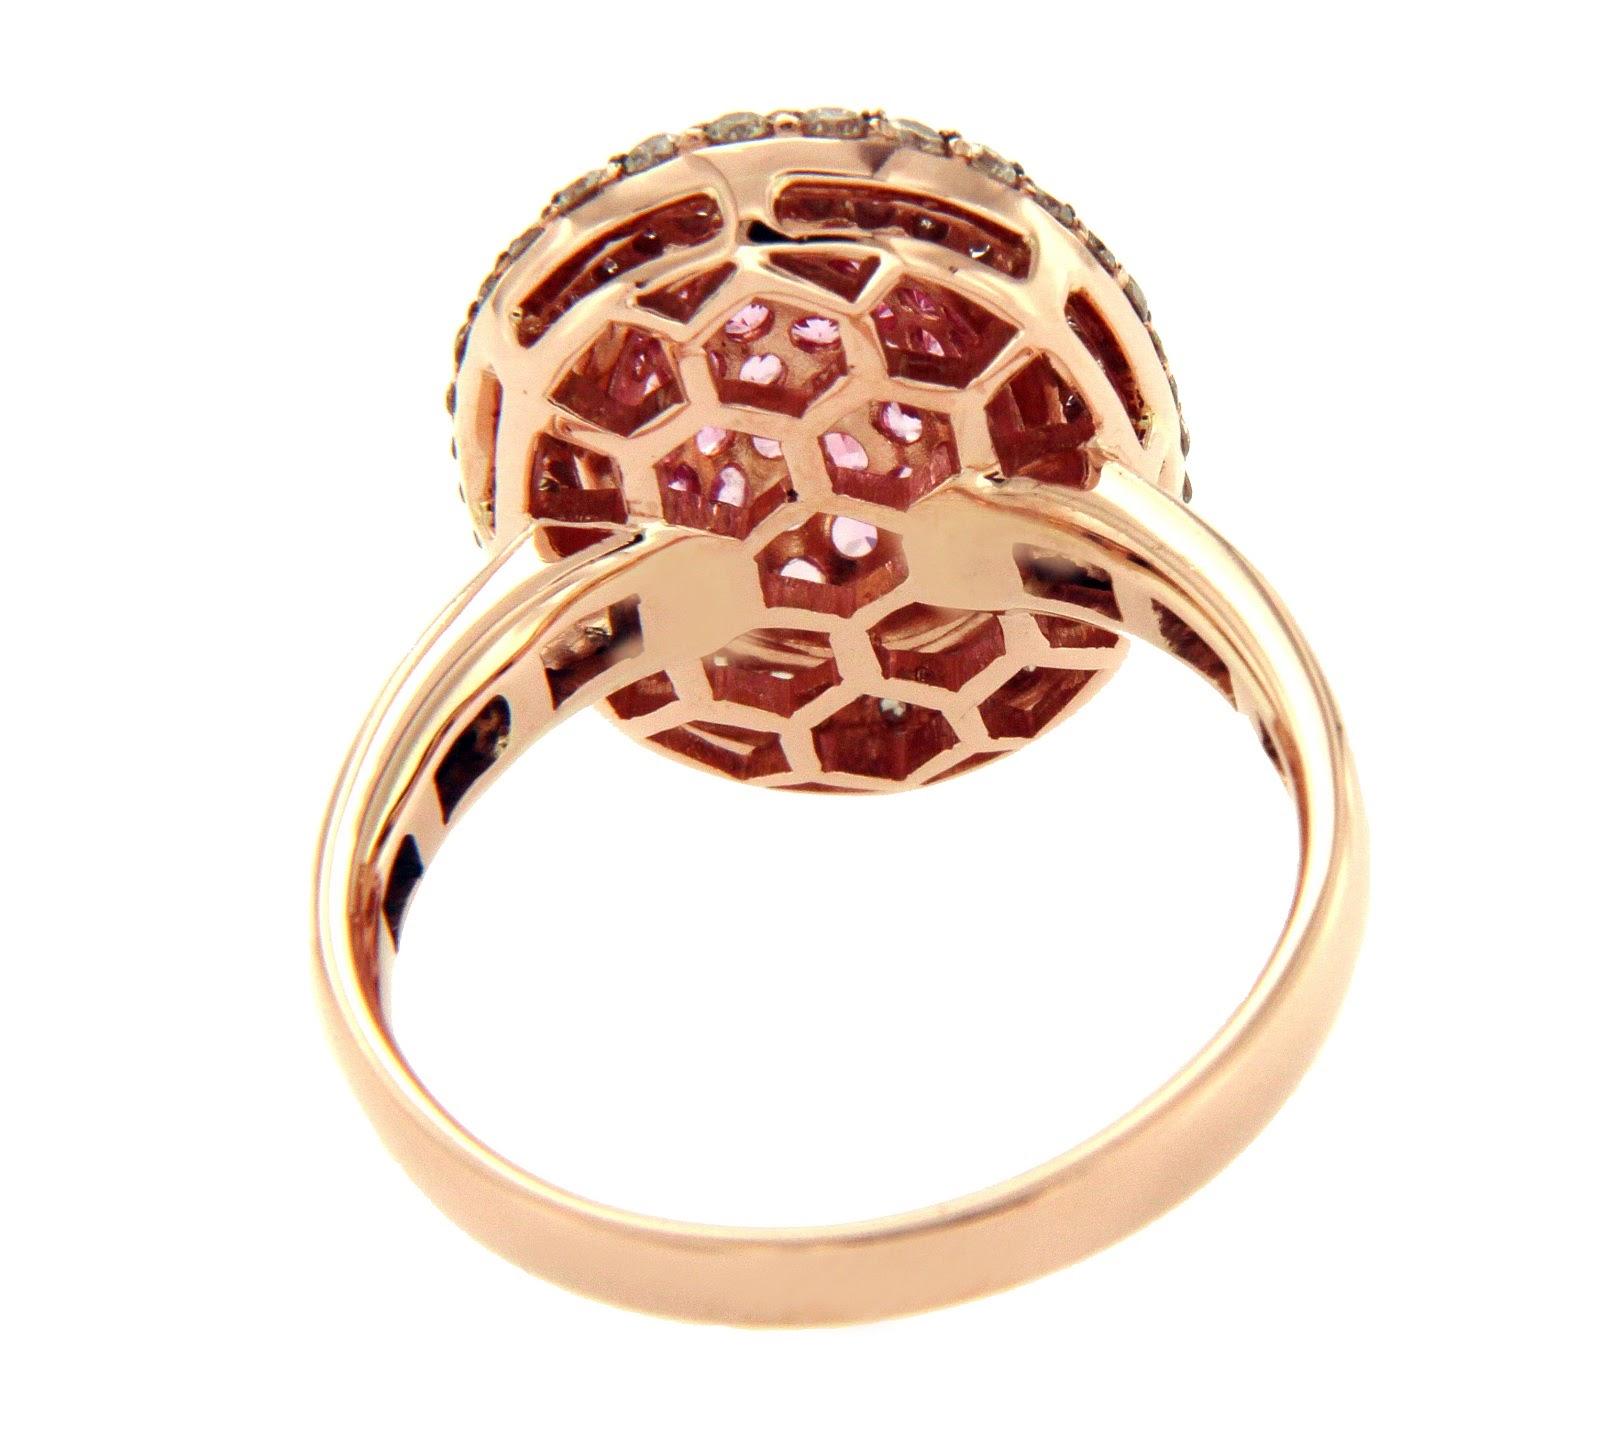 Type: Ring
Top: 18 mm
Band Width: 2.40 mm
Metal: Rose Gold 
Metal Purity: 14K
Hallmarks: Effy 14K
Total Weight: 5.4 Gram 
Size: 7.25
Condition: Pre Owned
Stone Type: Brown Diamond & Pink Sapphire